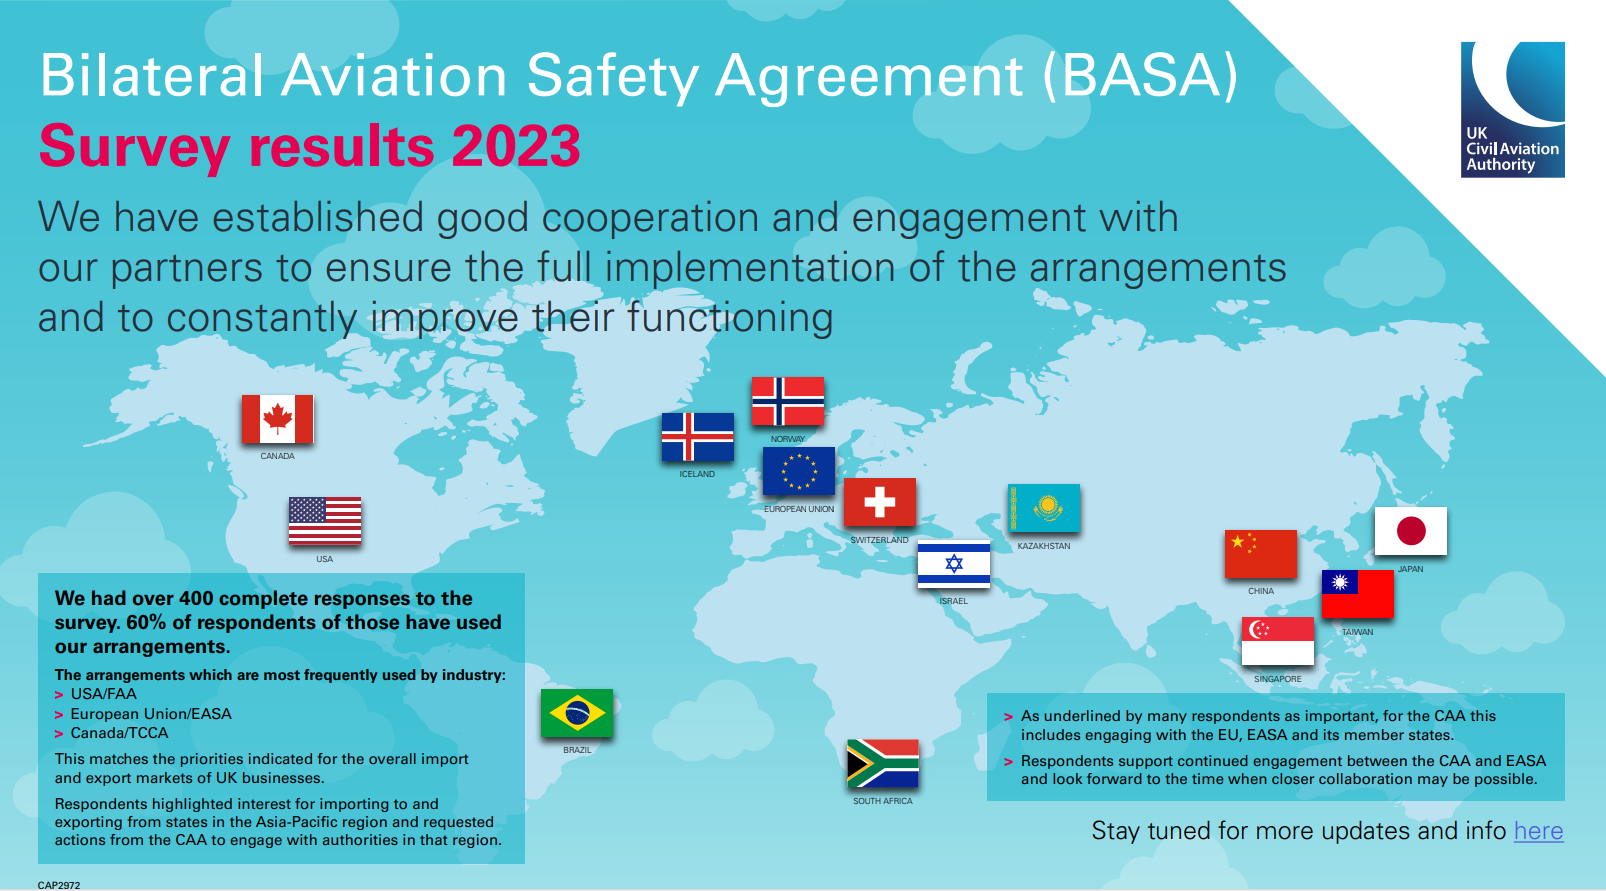 A graphic depicting the BASA survey results for 2023.